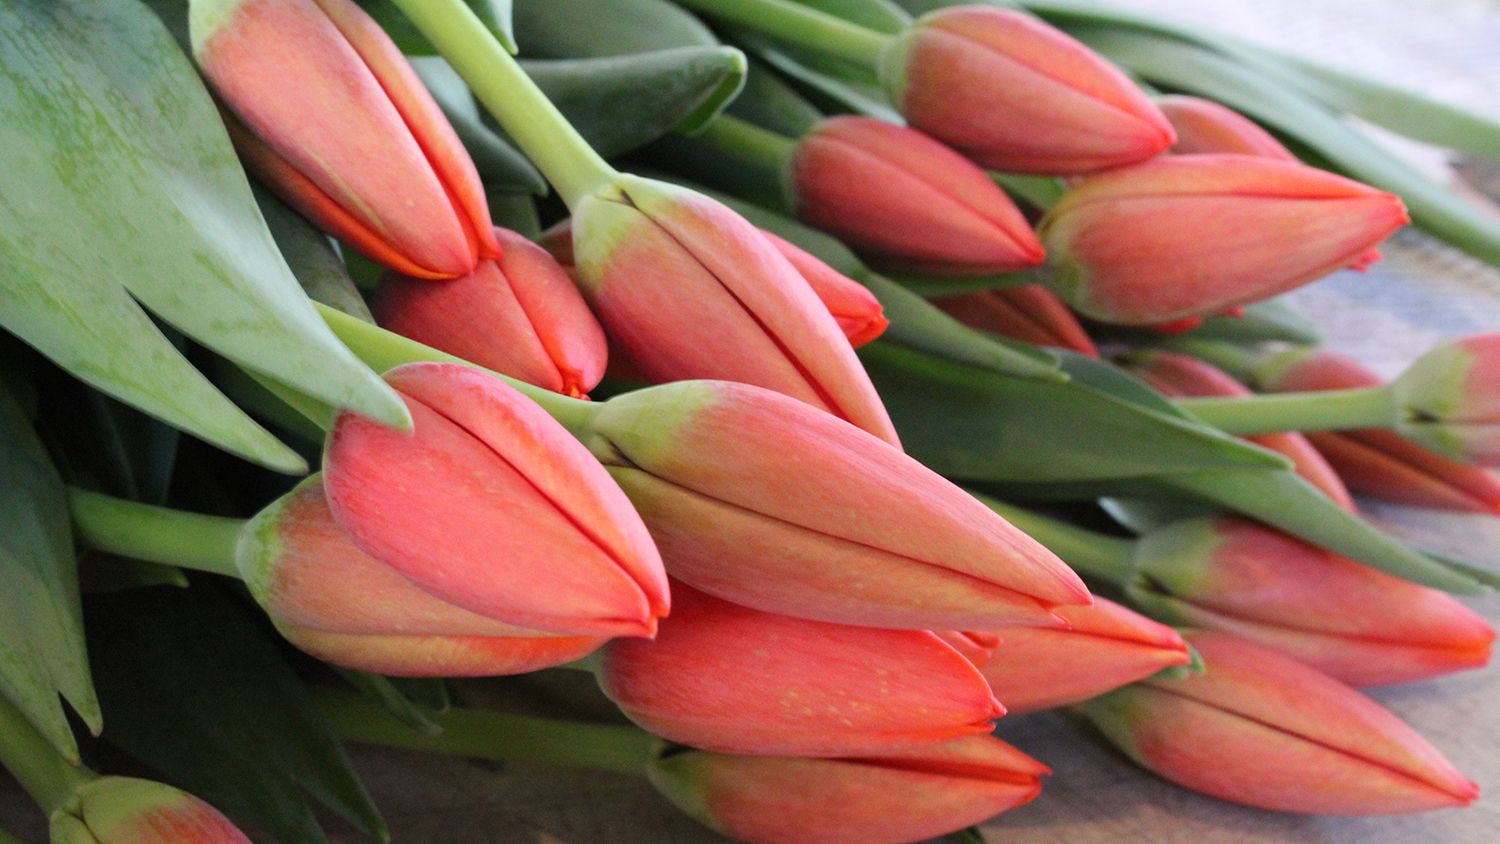 Closeup photo of a bunch of tulips about to open